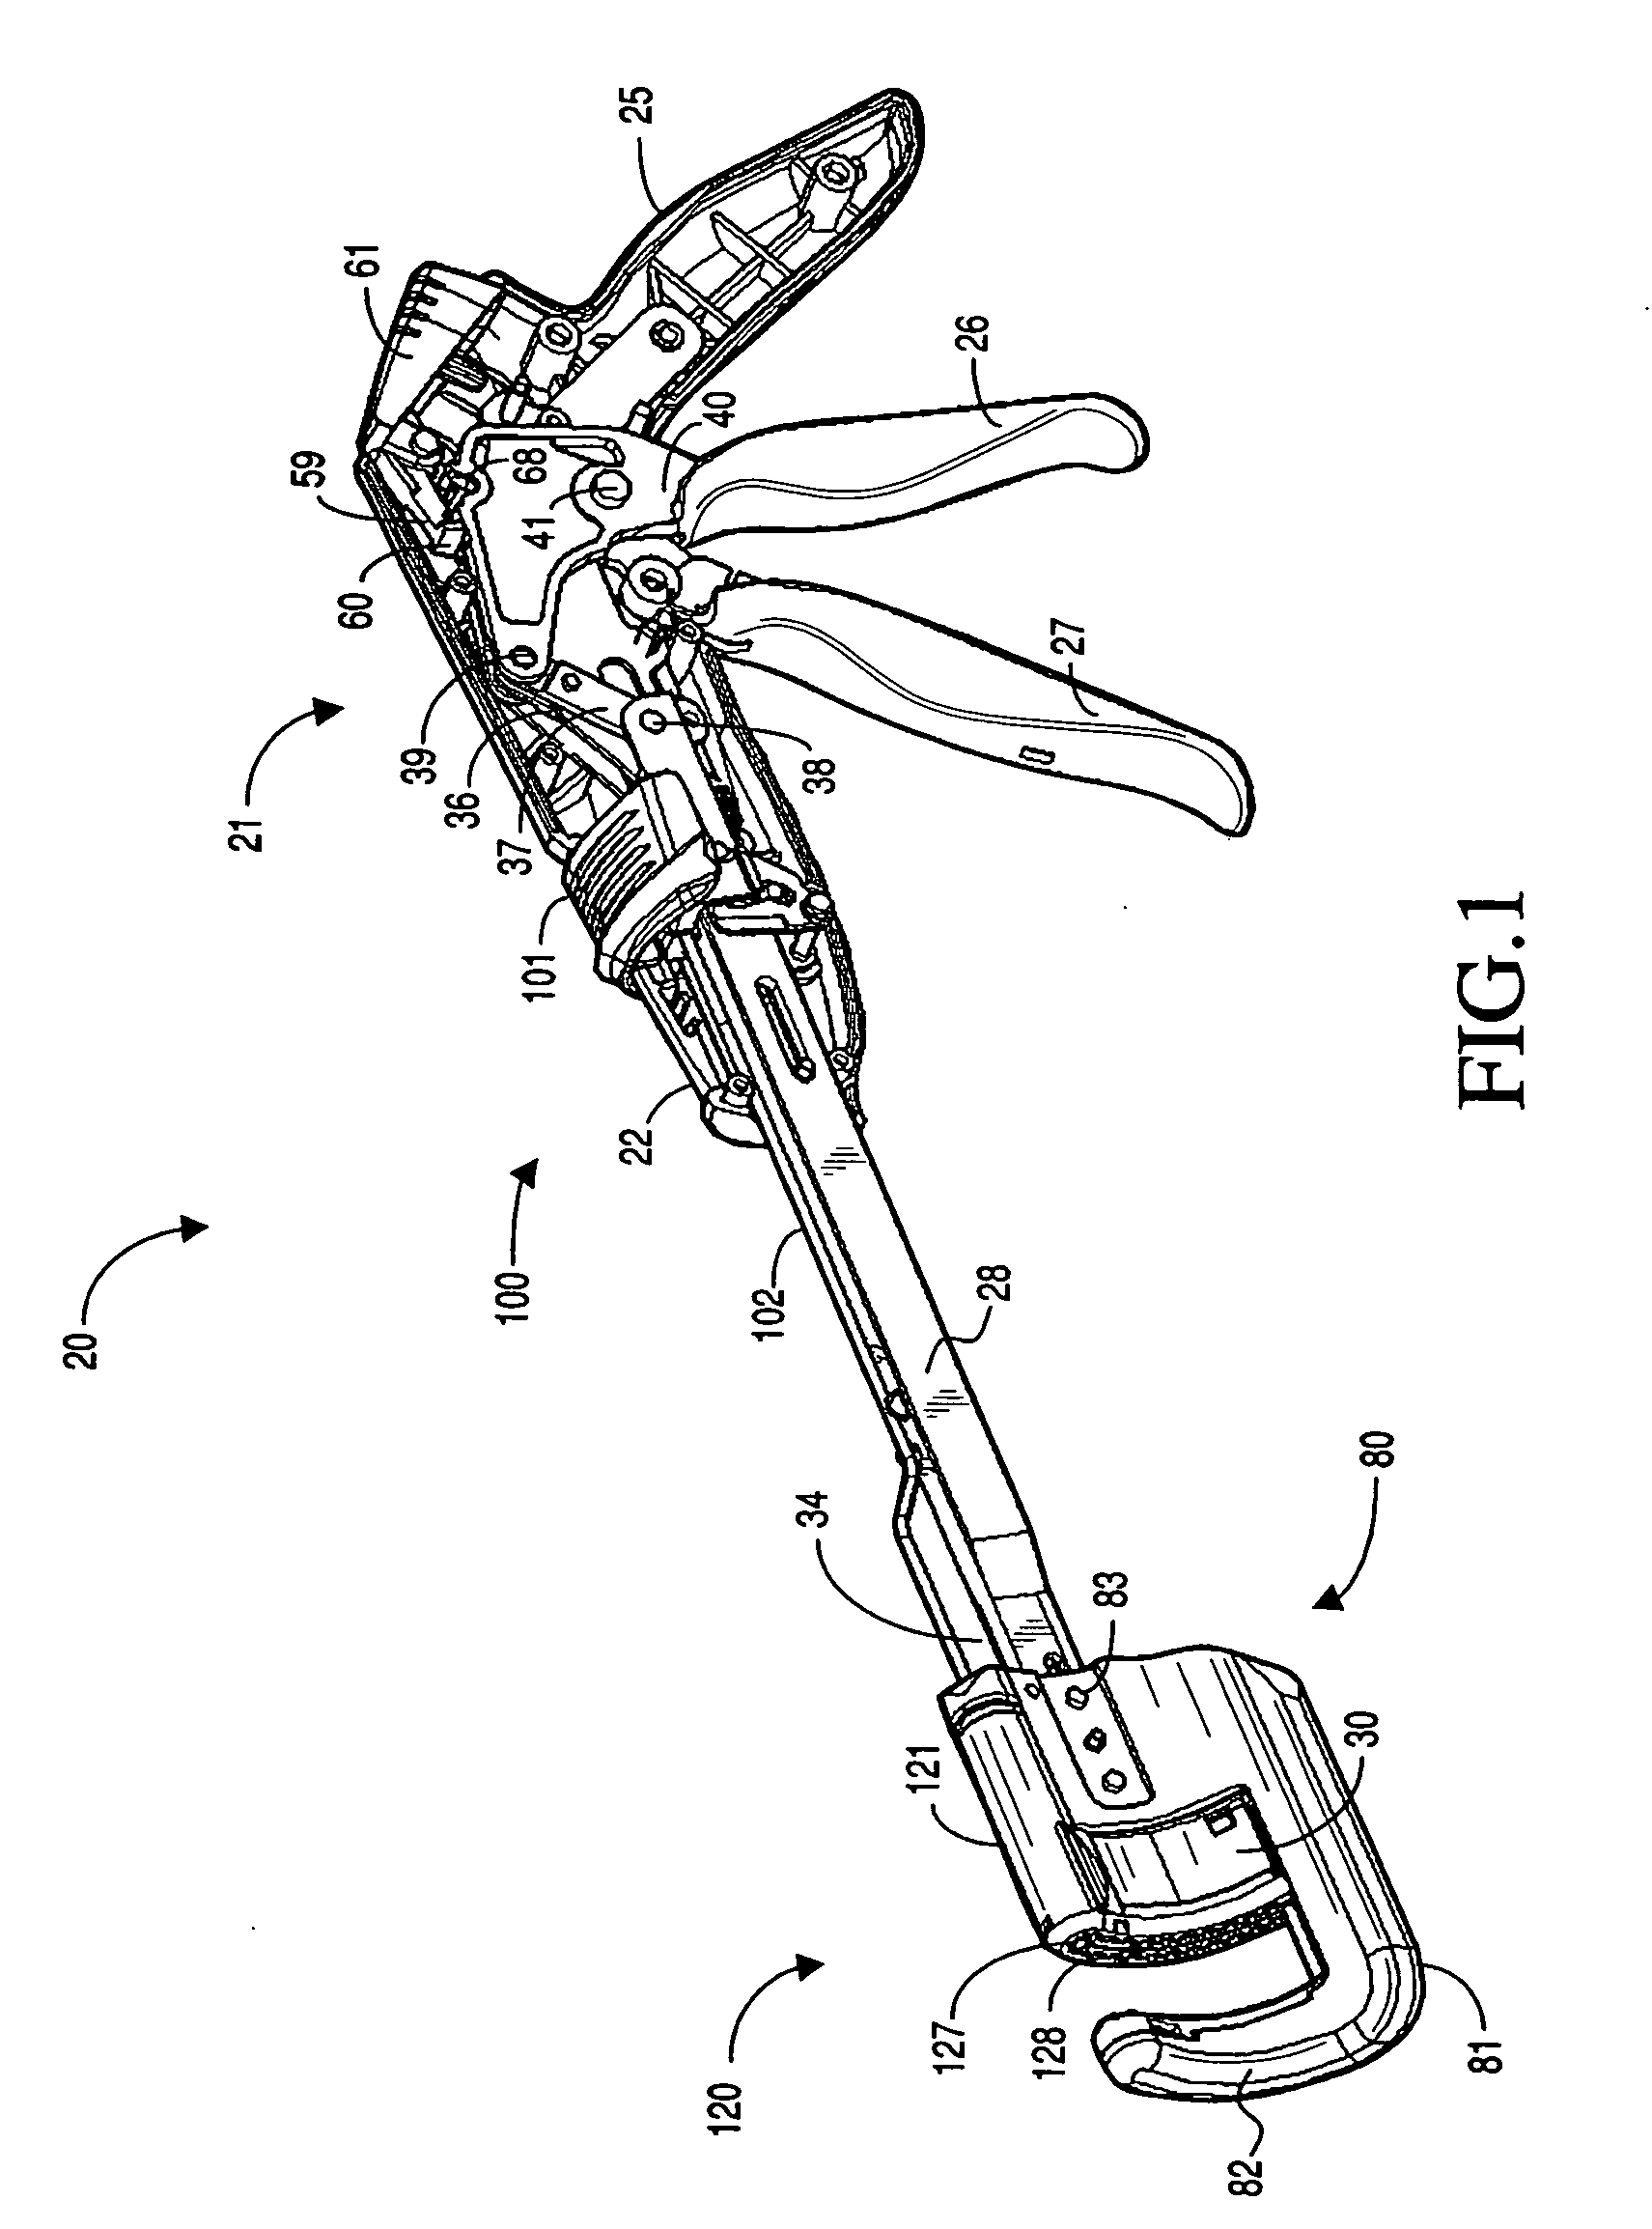 Retaining pin leaver advancement mechanism for a curved cutter stapler